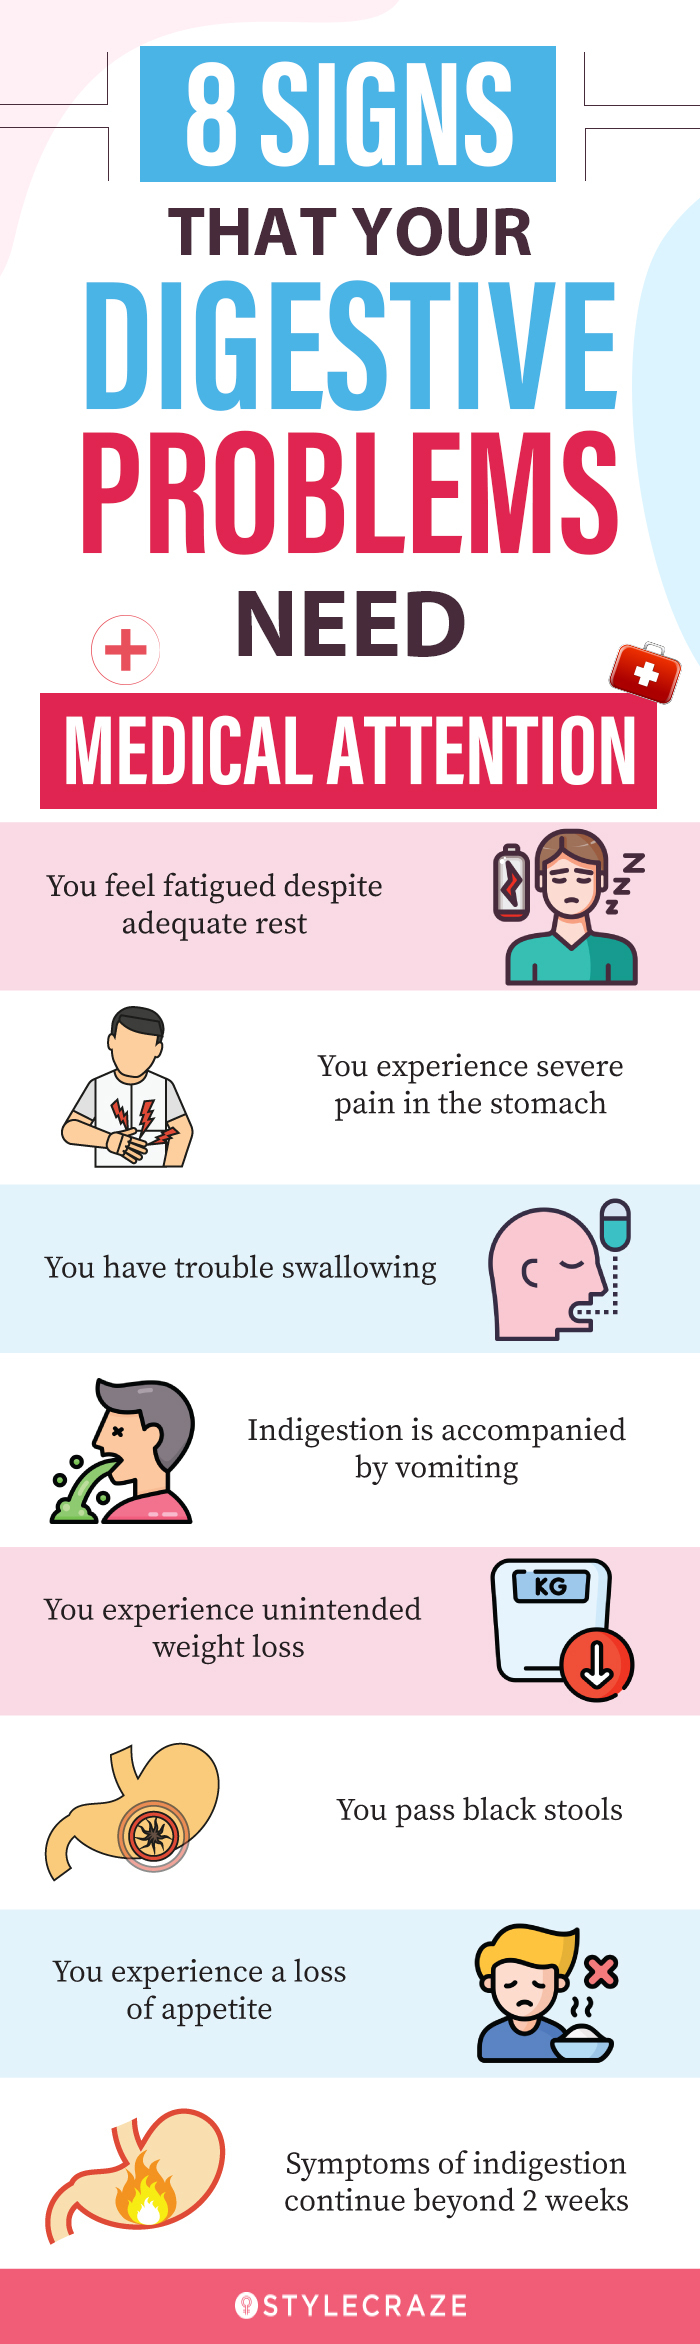 8 signs that your digestive problems need medical attention [infographic]